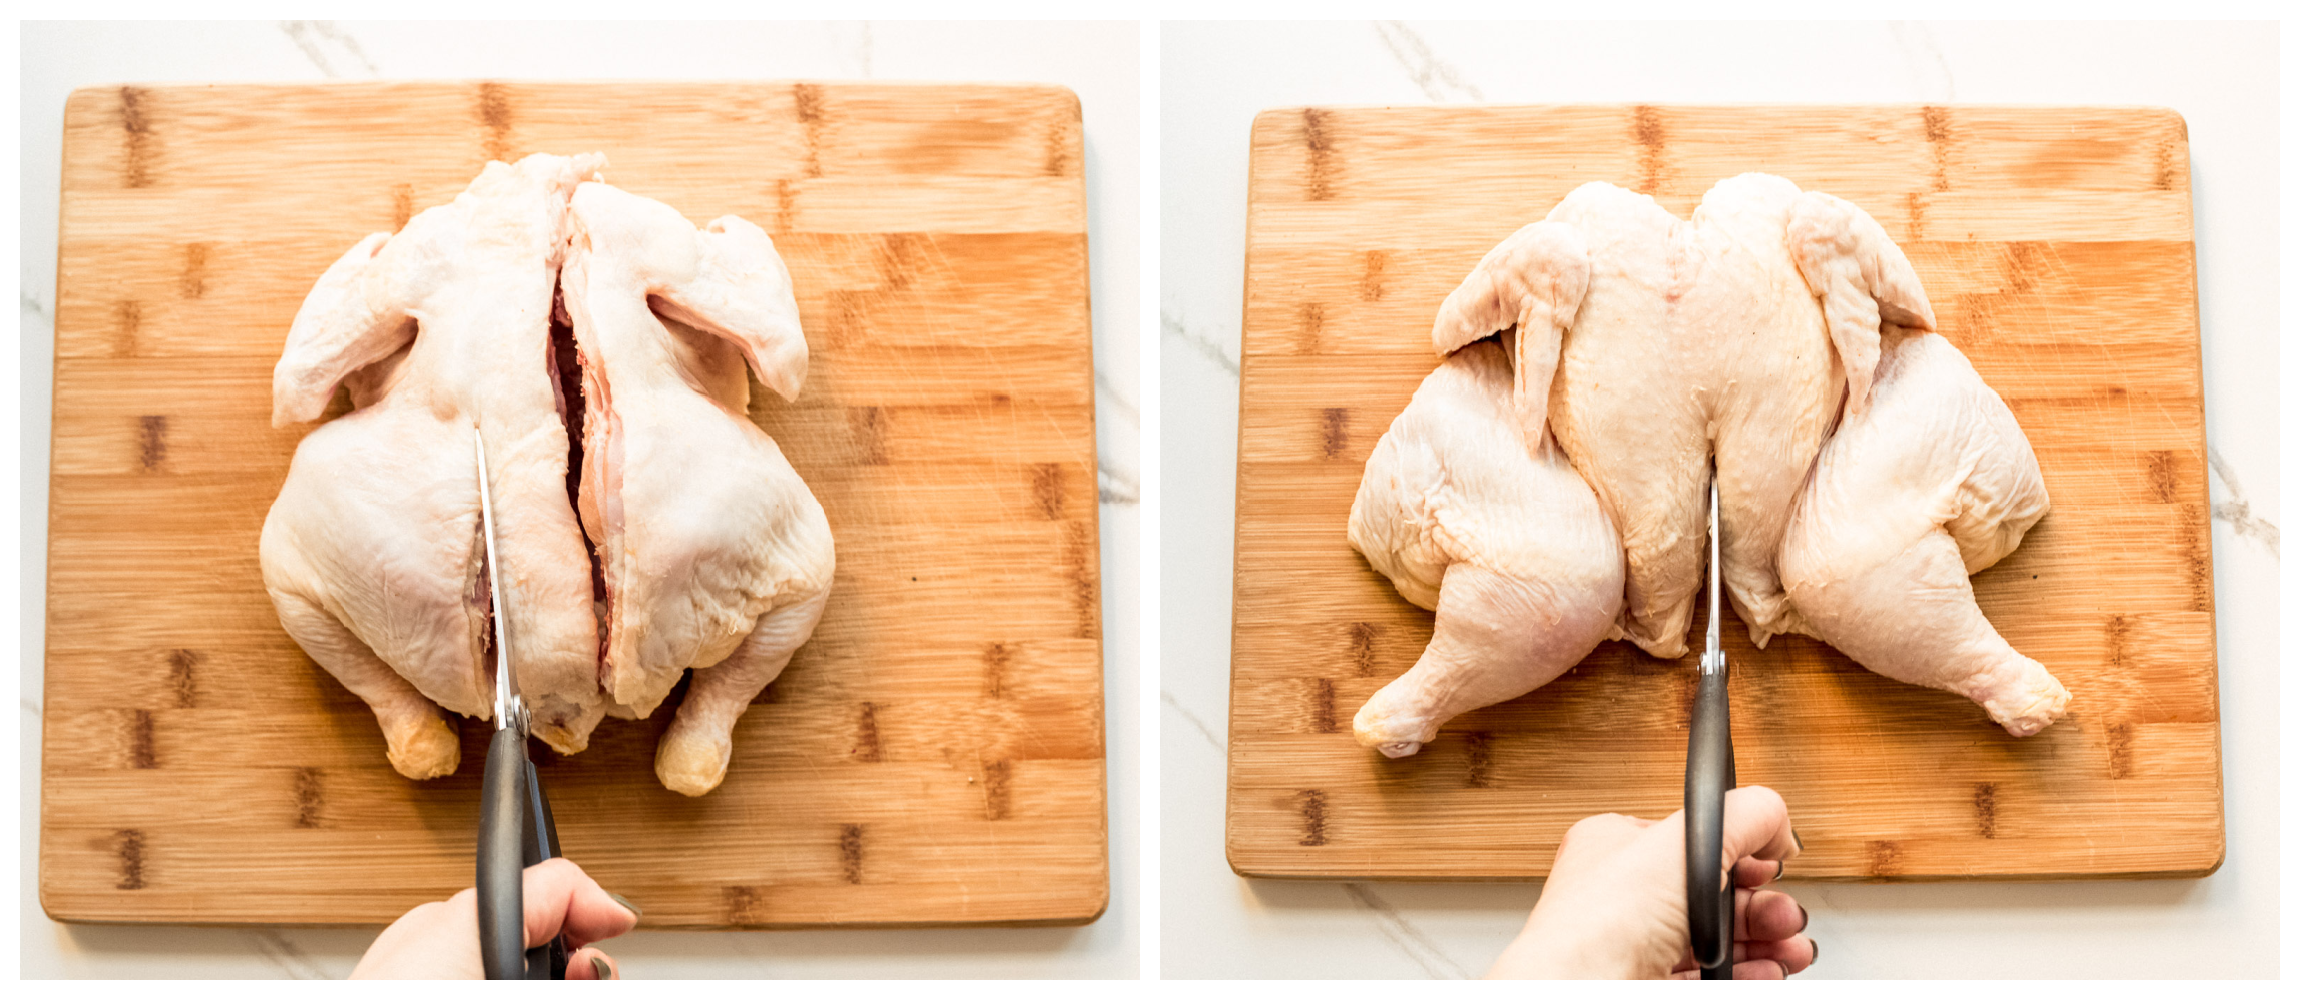 instructions on how to split chicken in half.